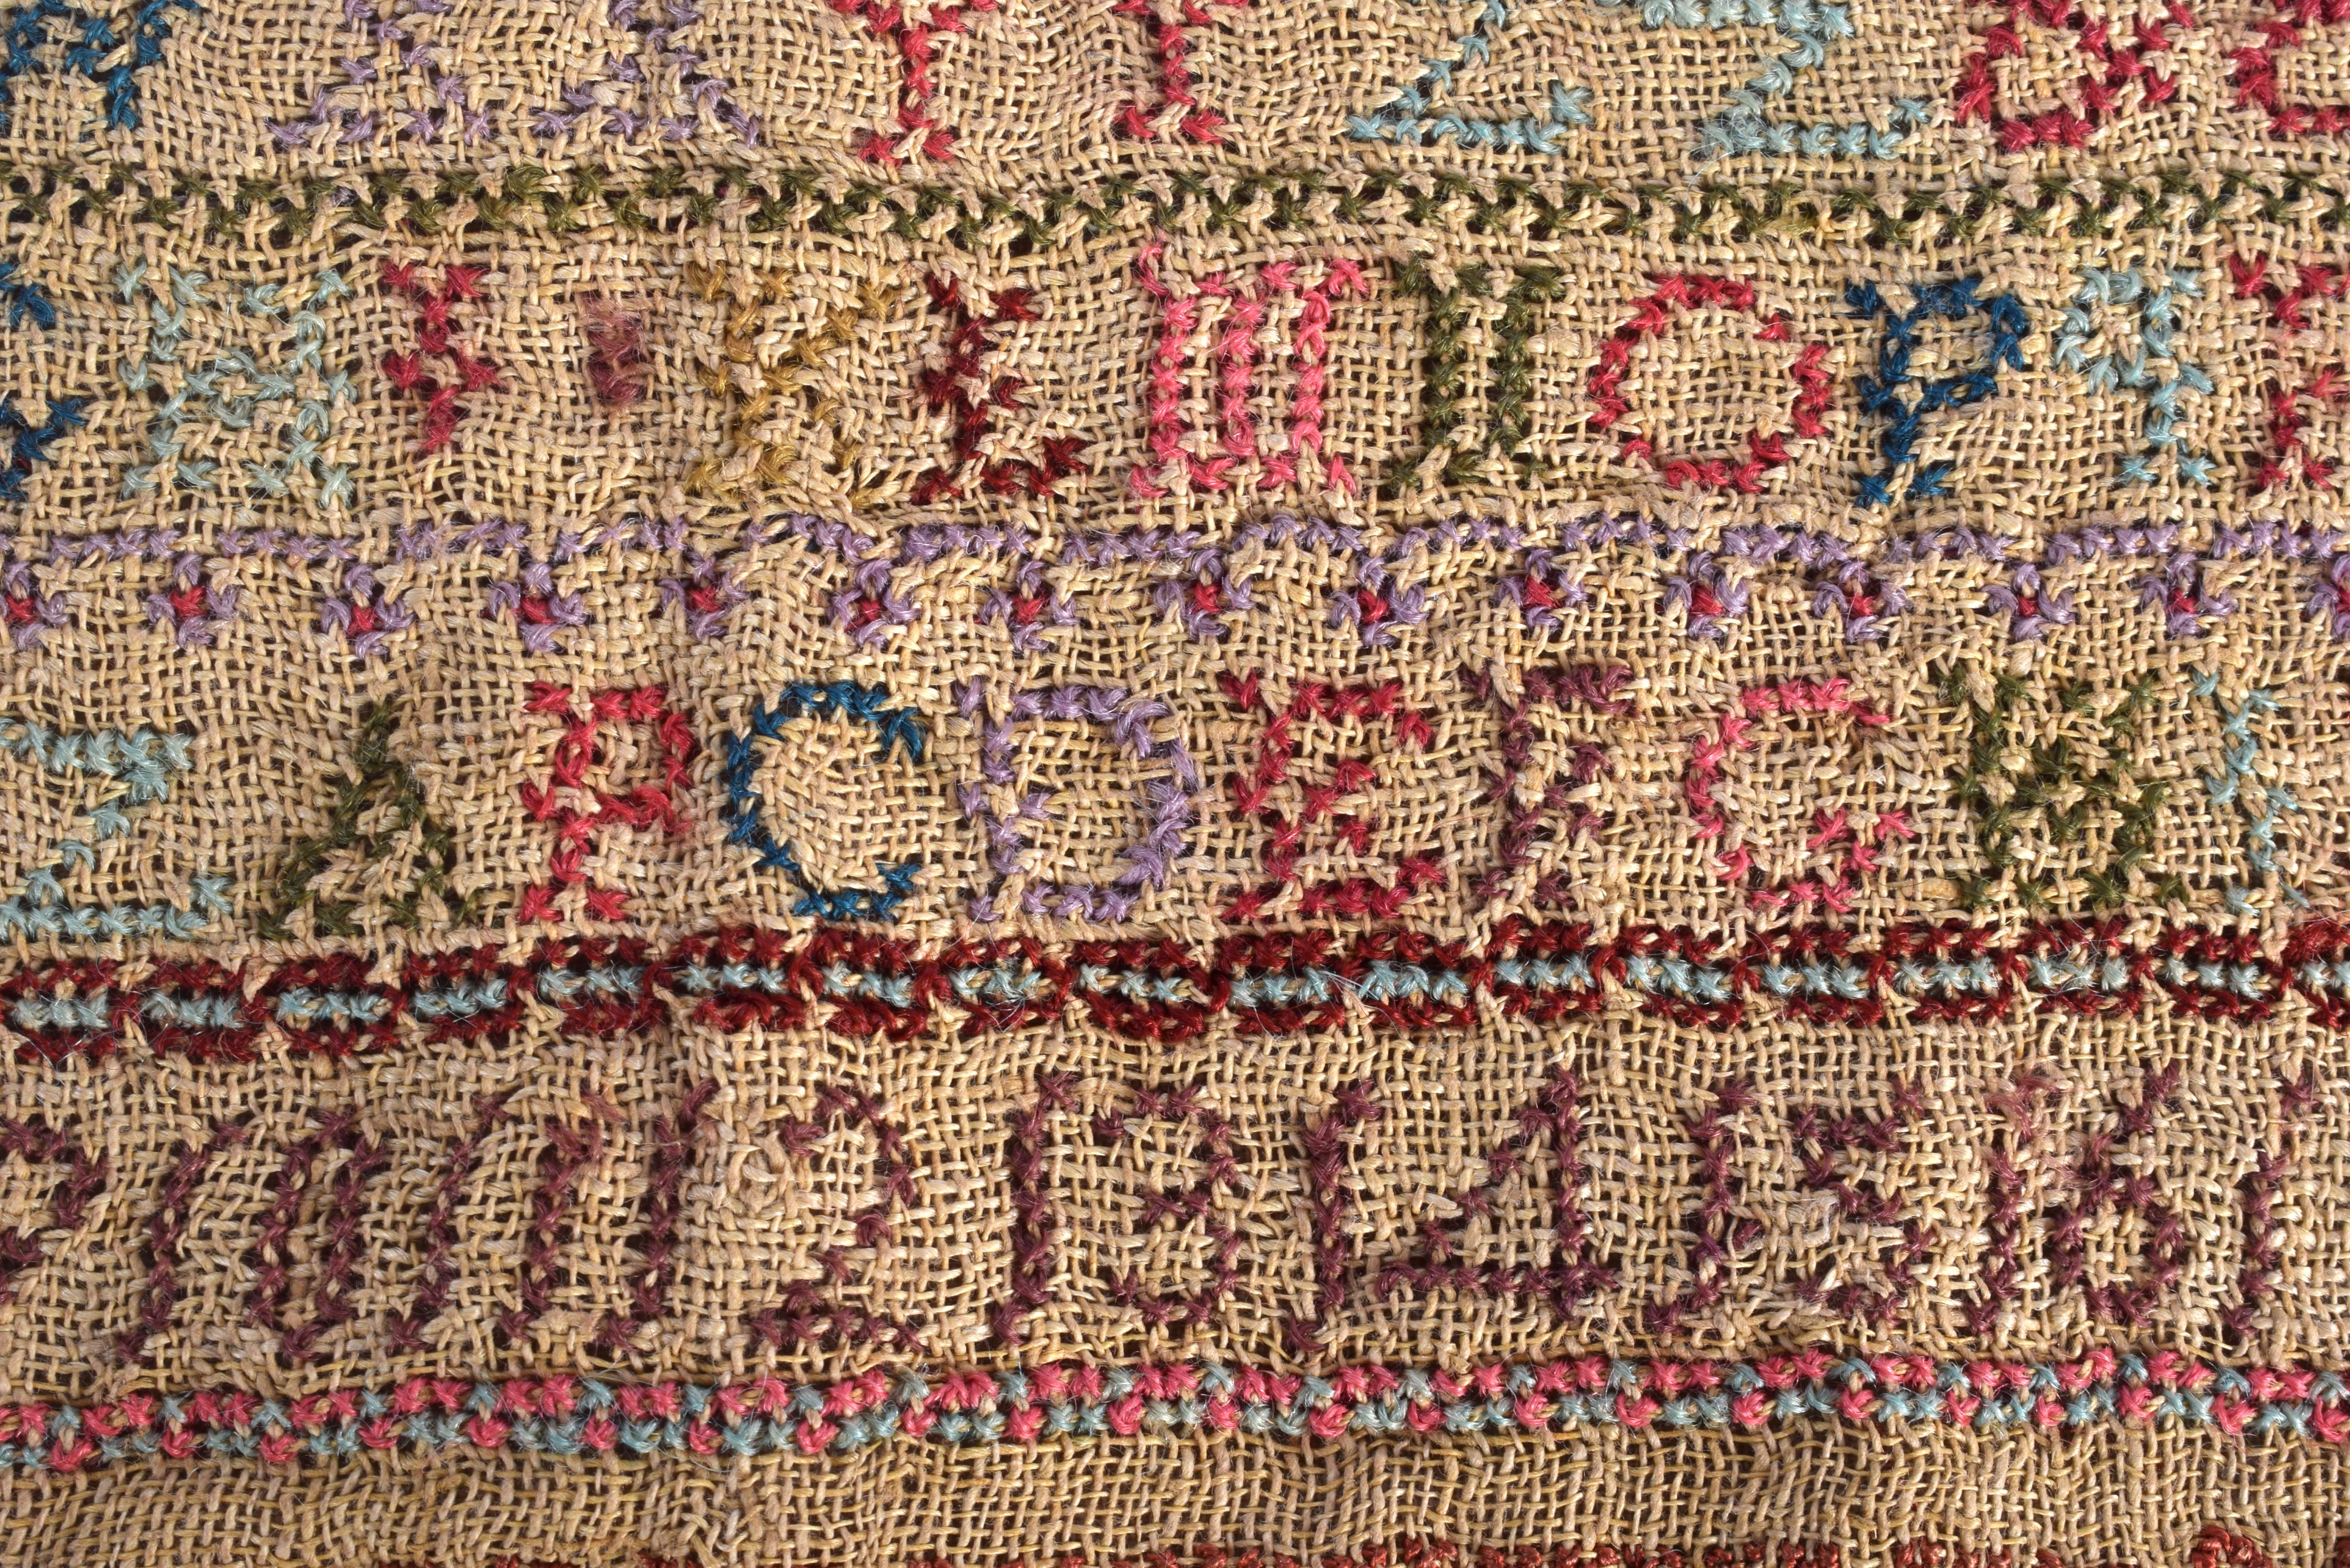 AN EARLY 19TH CENTURY ENGLISH EMBROIDERED SAMPLER. 28 cm square. - Image 4 of 5